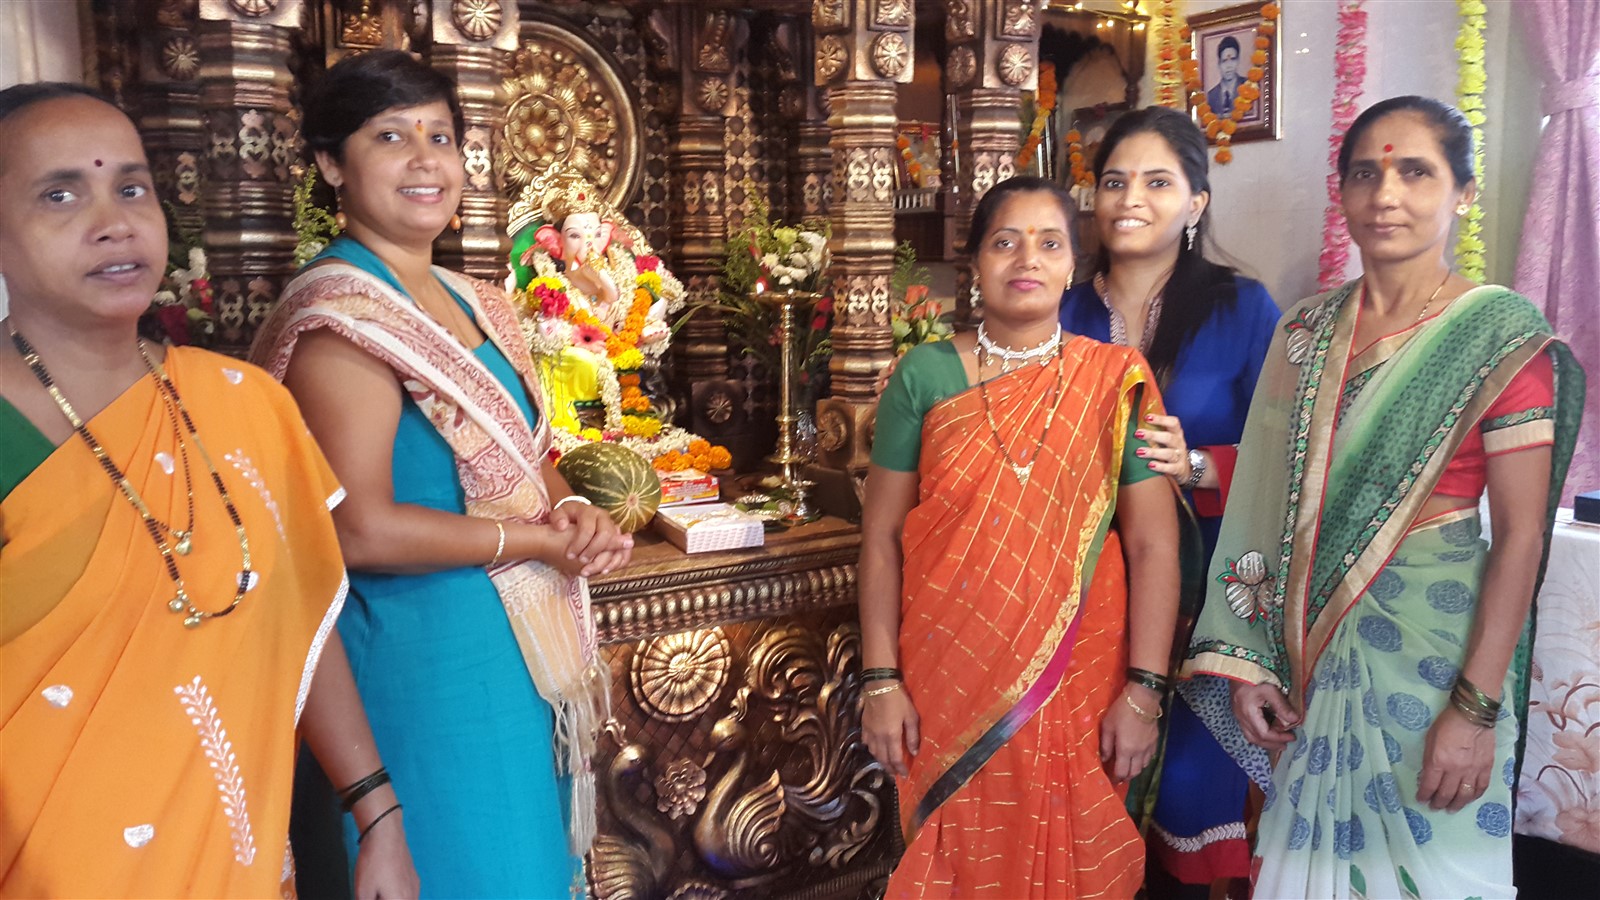 Staff visiting the women during there festival of Ganesh Chaturthi